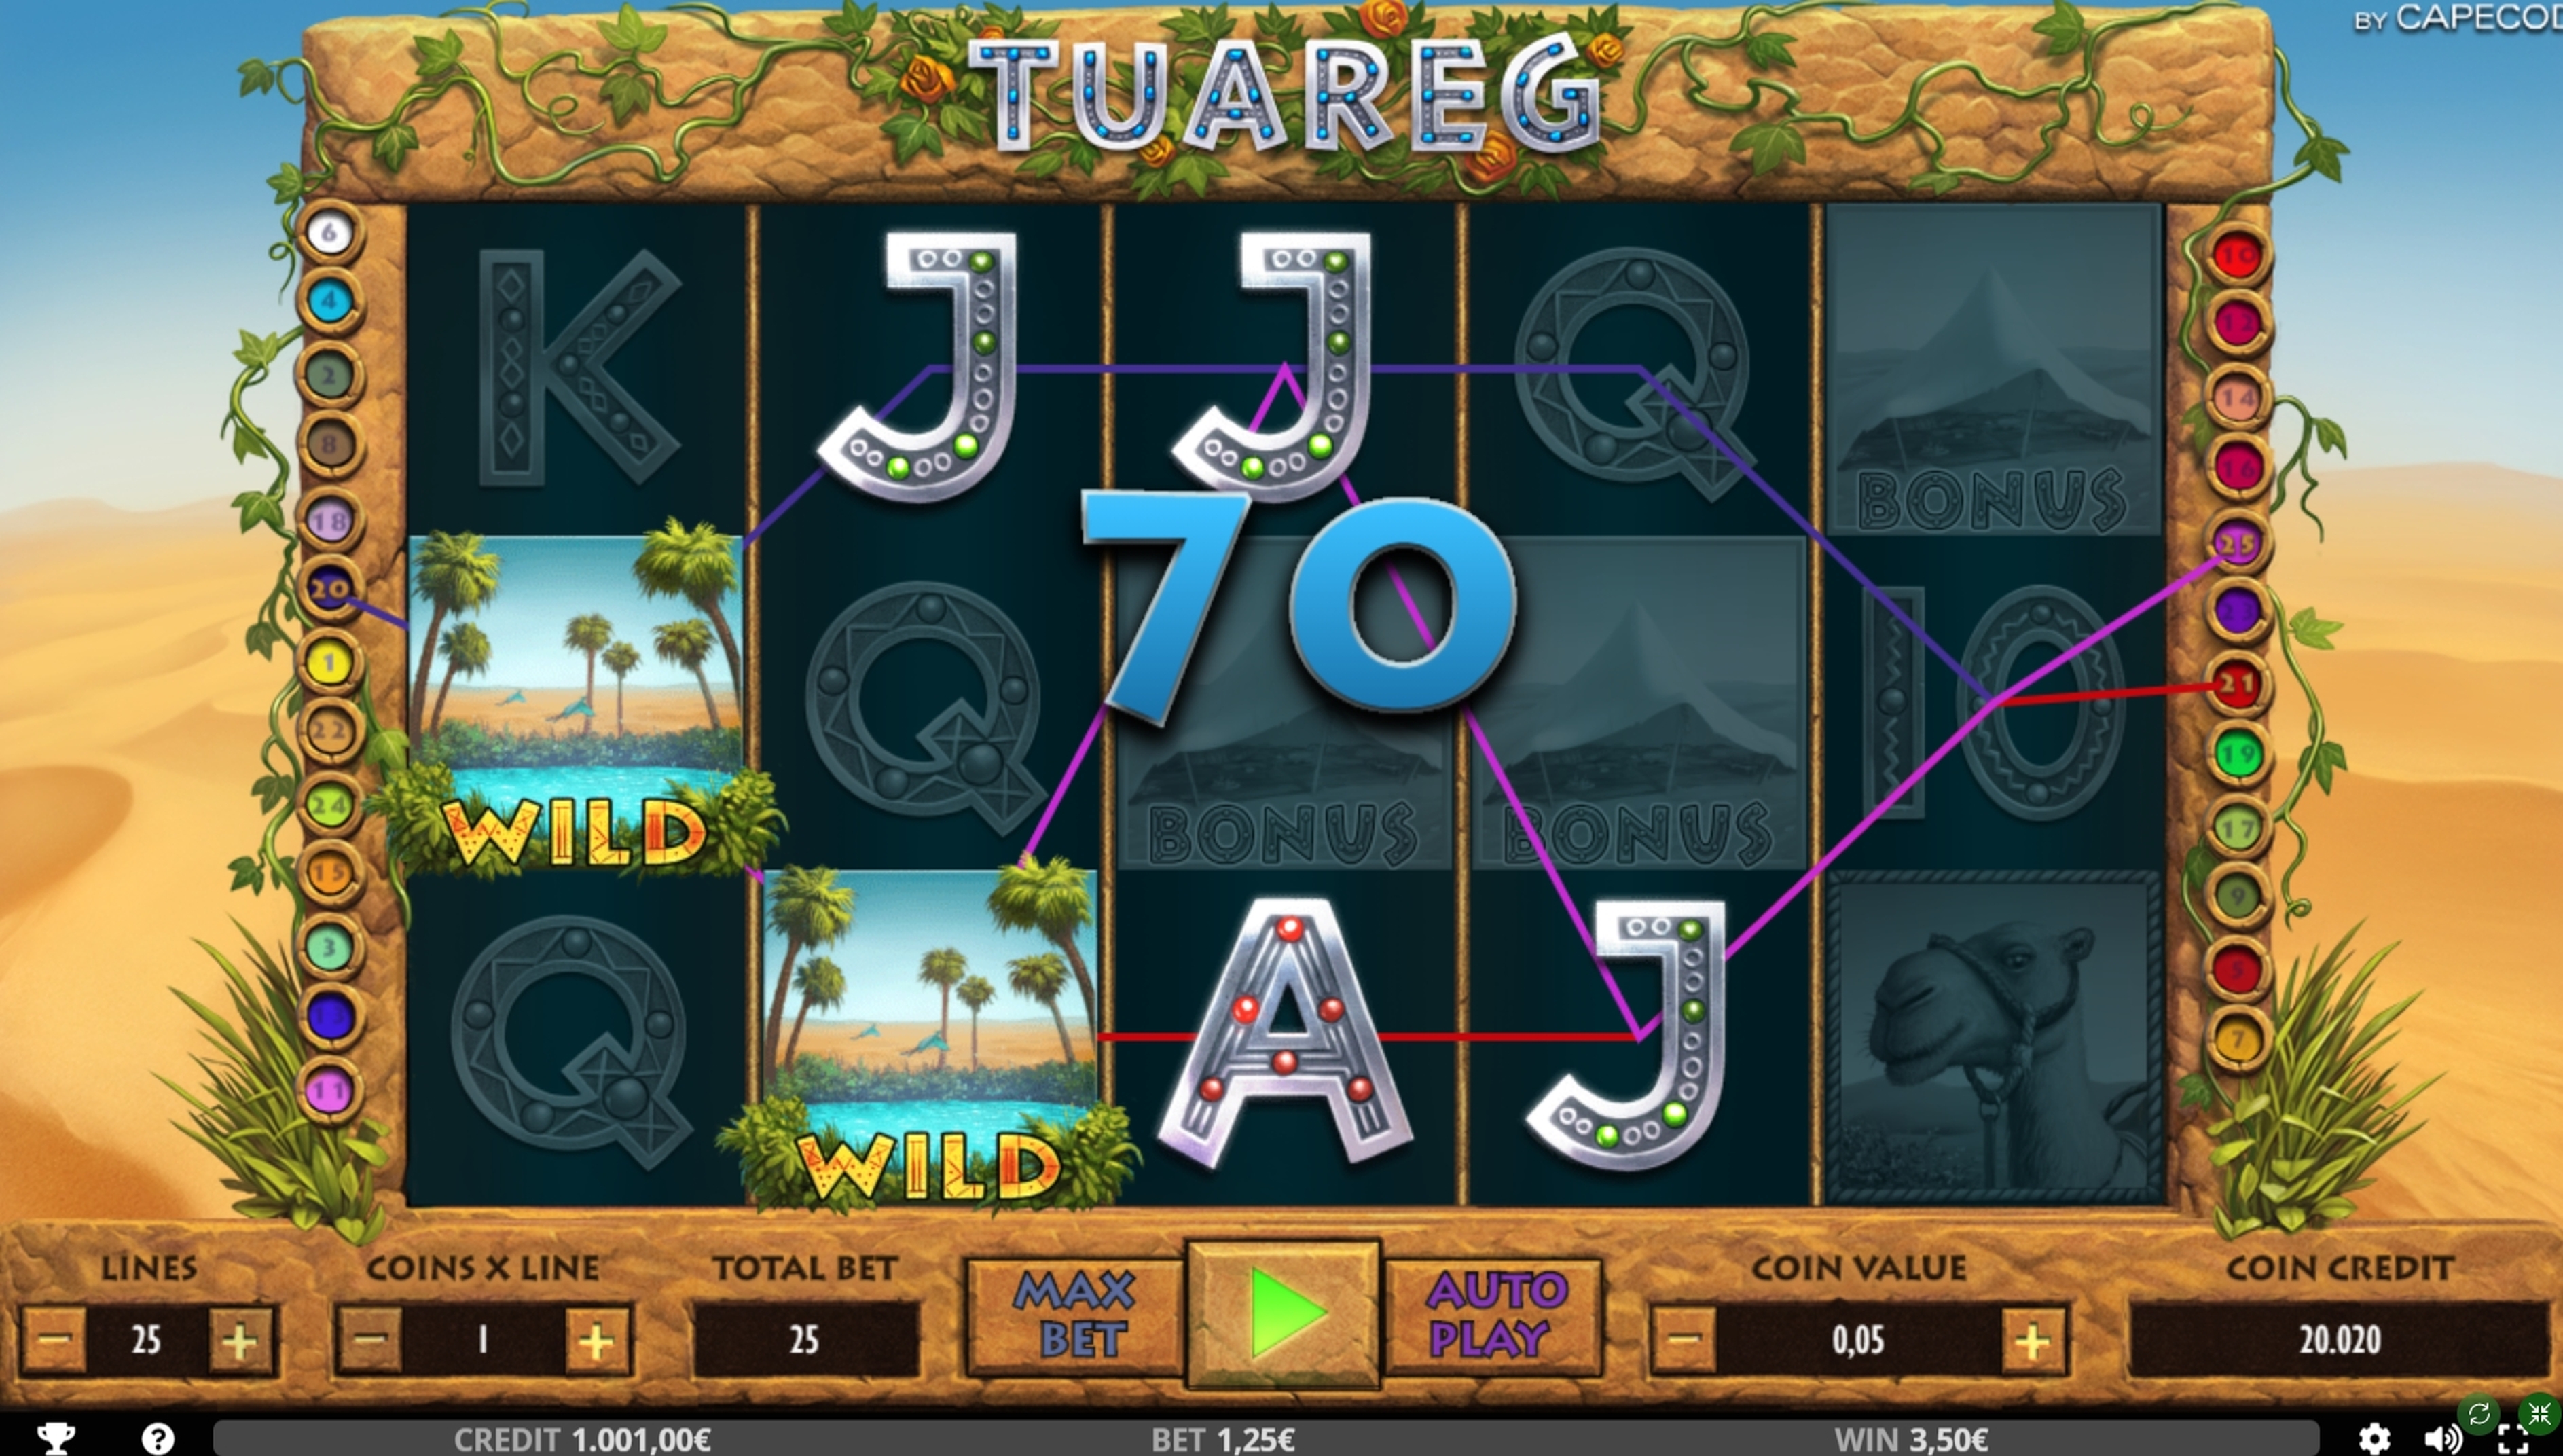 Win Money in Tuareg Free Slot Game by Capecod Gaming